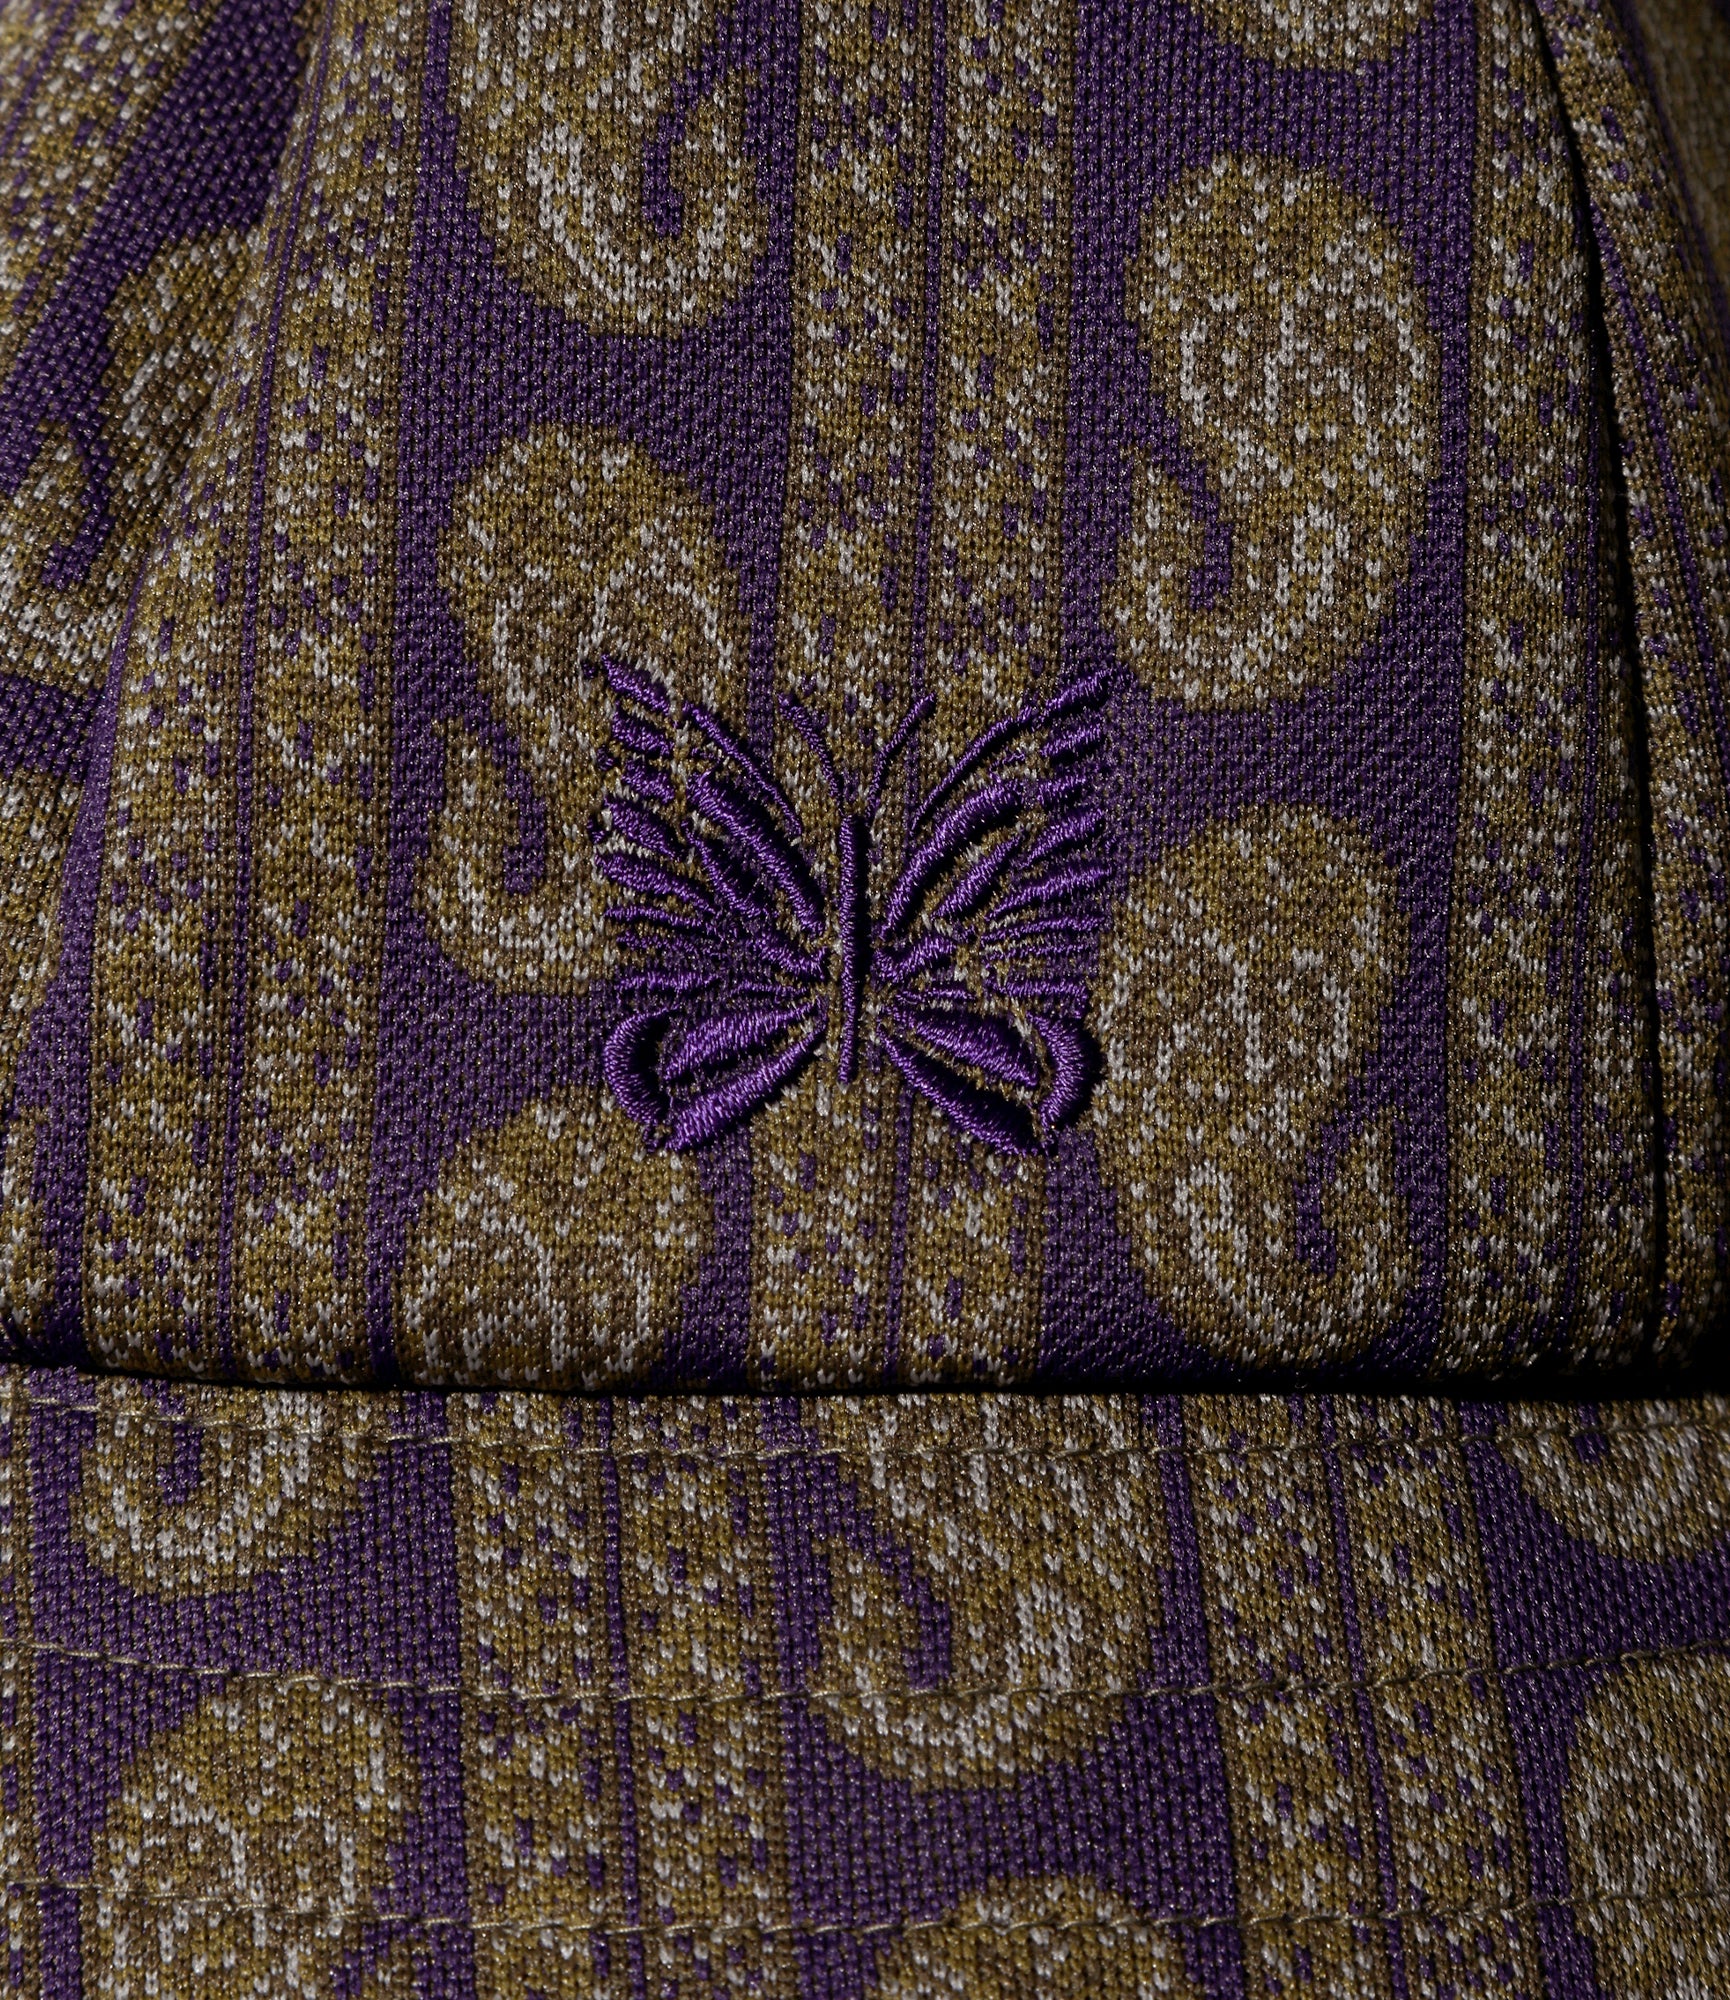 Nepenthes Exclusive - Bermuda Hat - Purple - Poly Jq.